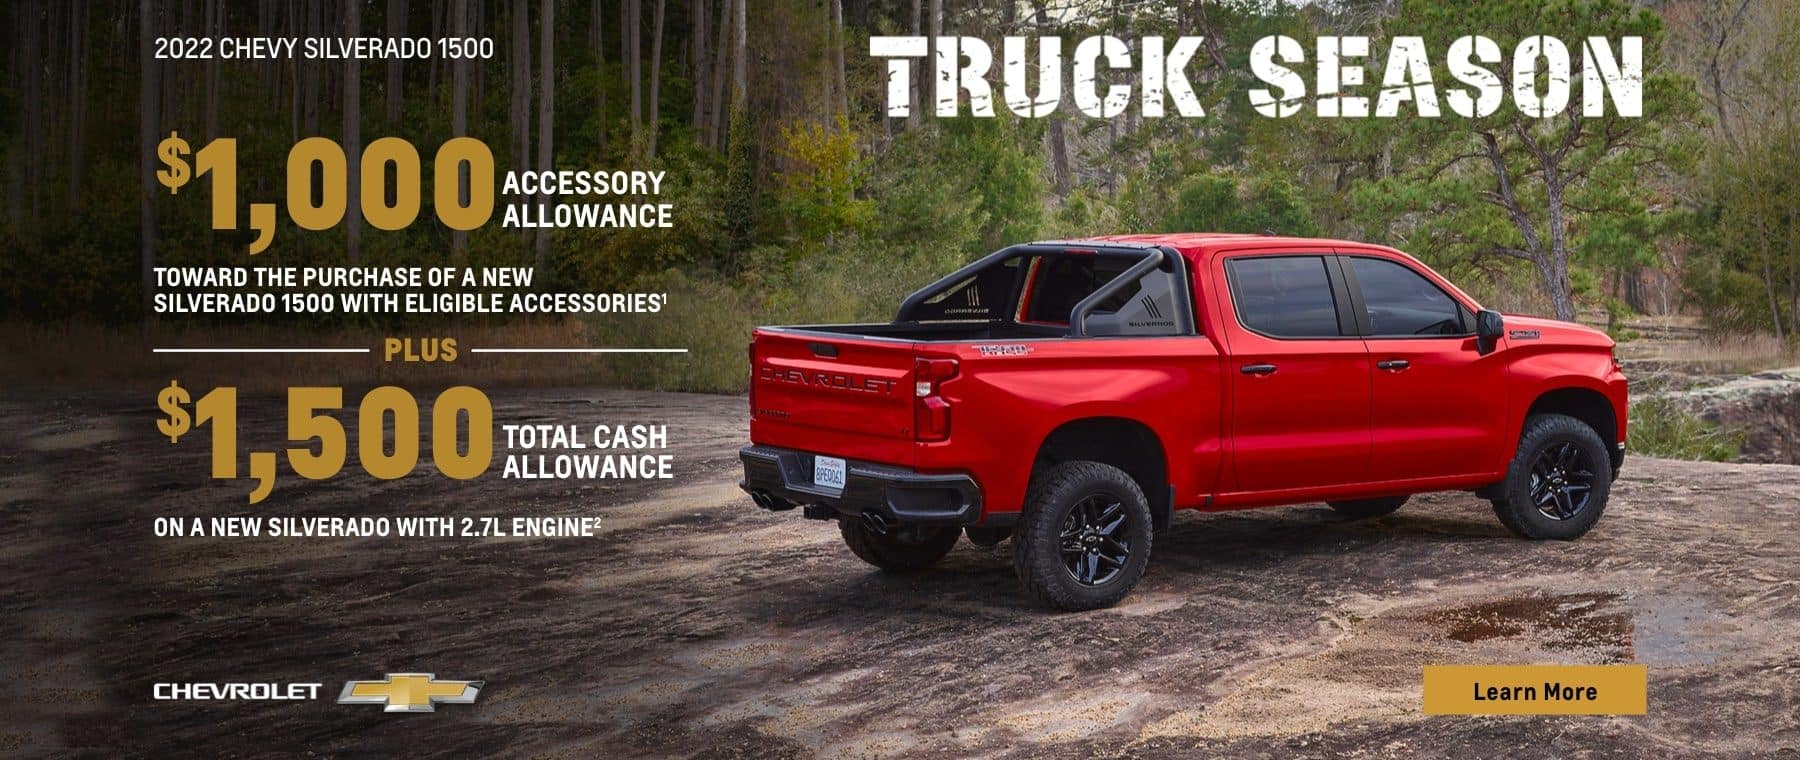 2022 Chevy Silverado 1500. Truck Season. Make it your own. $1,000 accessory allowance toward the purchase or lease of a new Silverado 1500 with eligible accessories. Plus, $1,500 cash allowance when you purchase a new Silverado with 2.7L Engine.